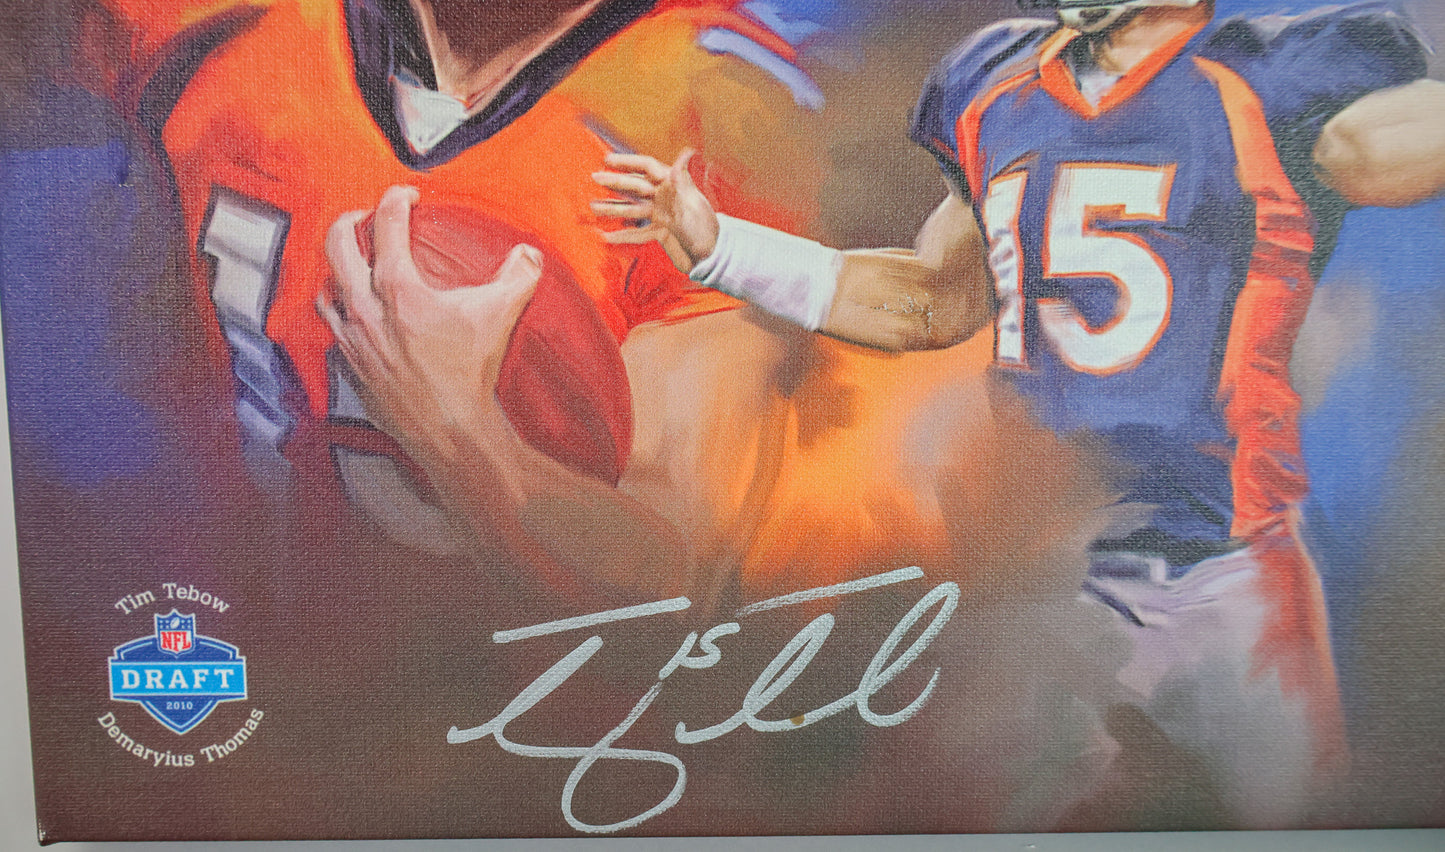 Tim Tebow and Demaryius Thomas Autographed Denver Broncos Canvas Piece